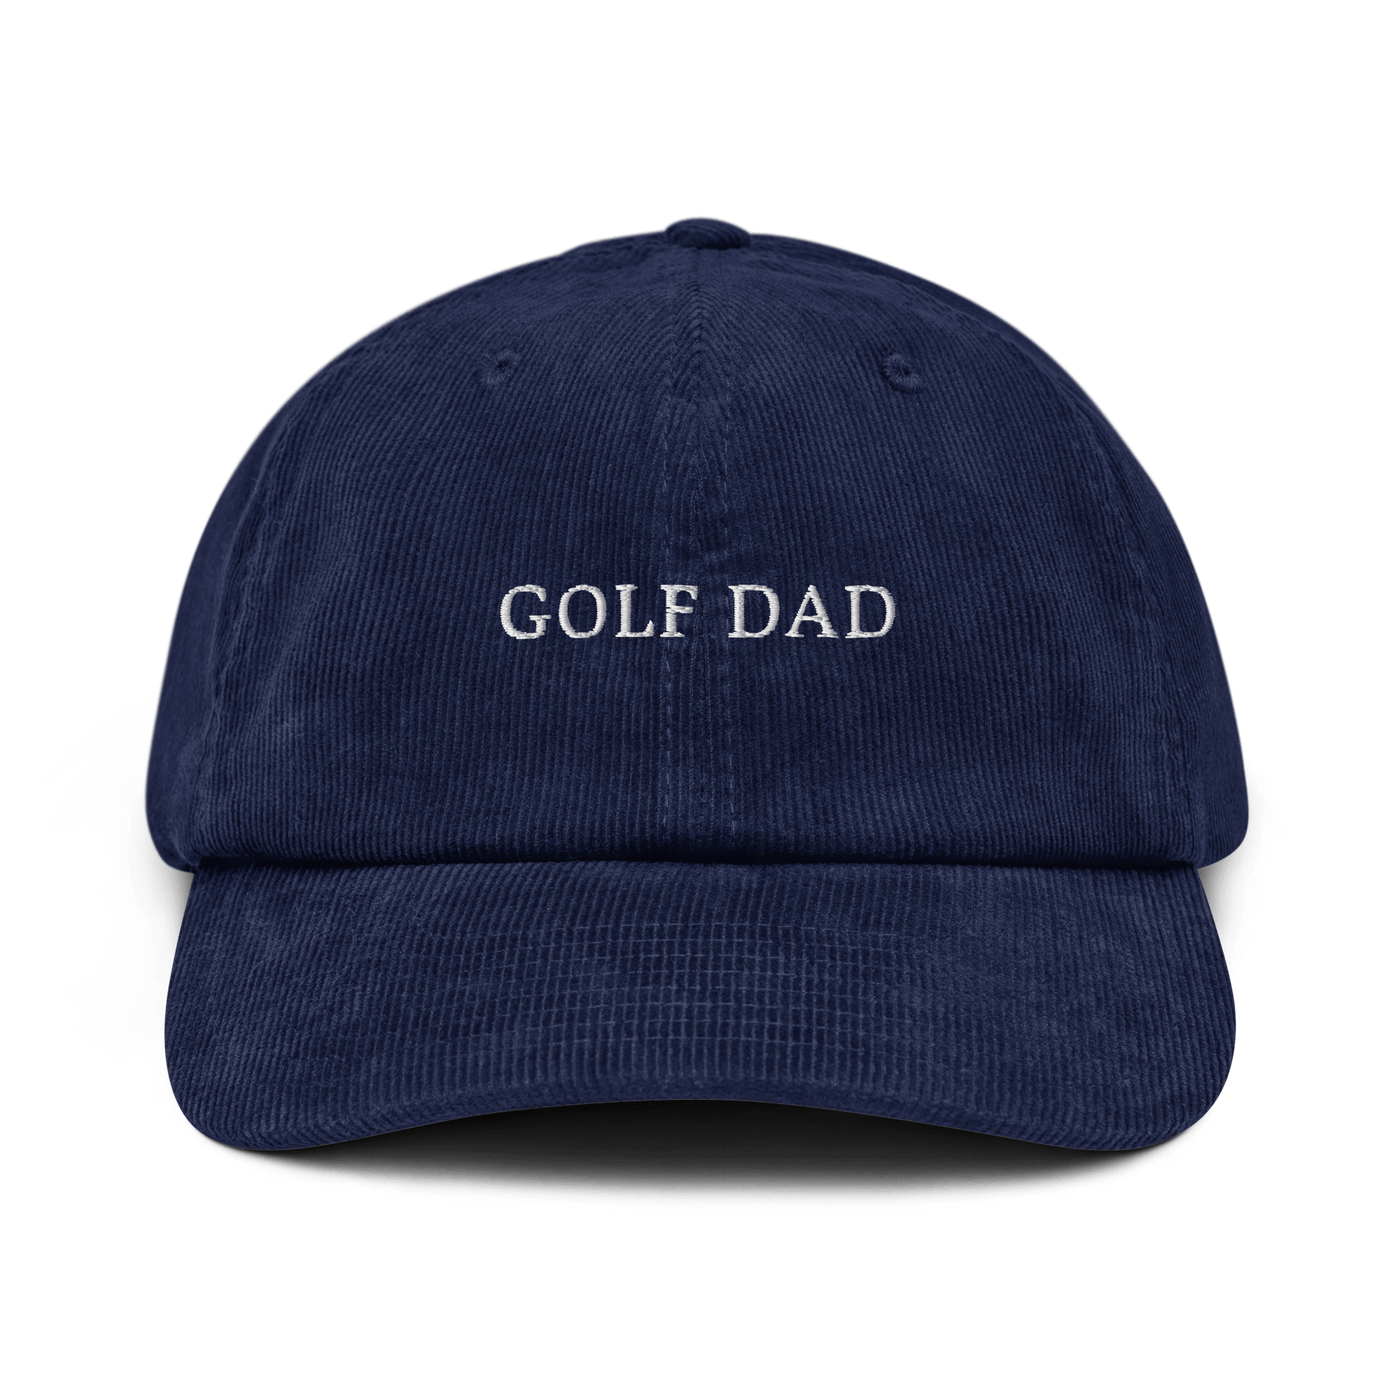 Golf Dad Corduroy hat - Oxford Navy - - Just Another Cap Store